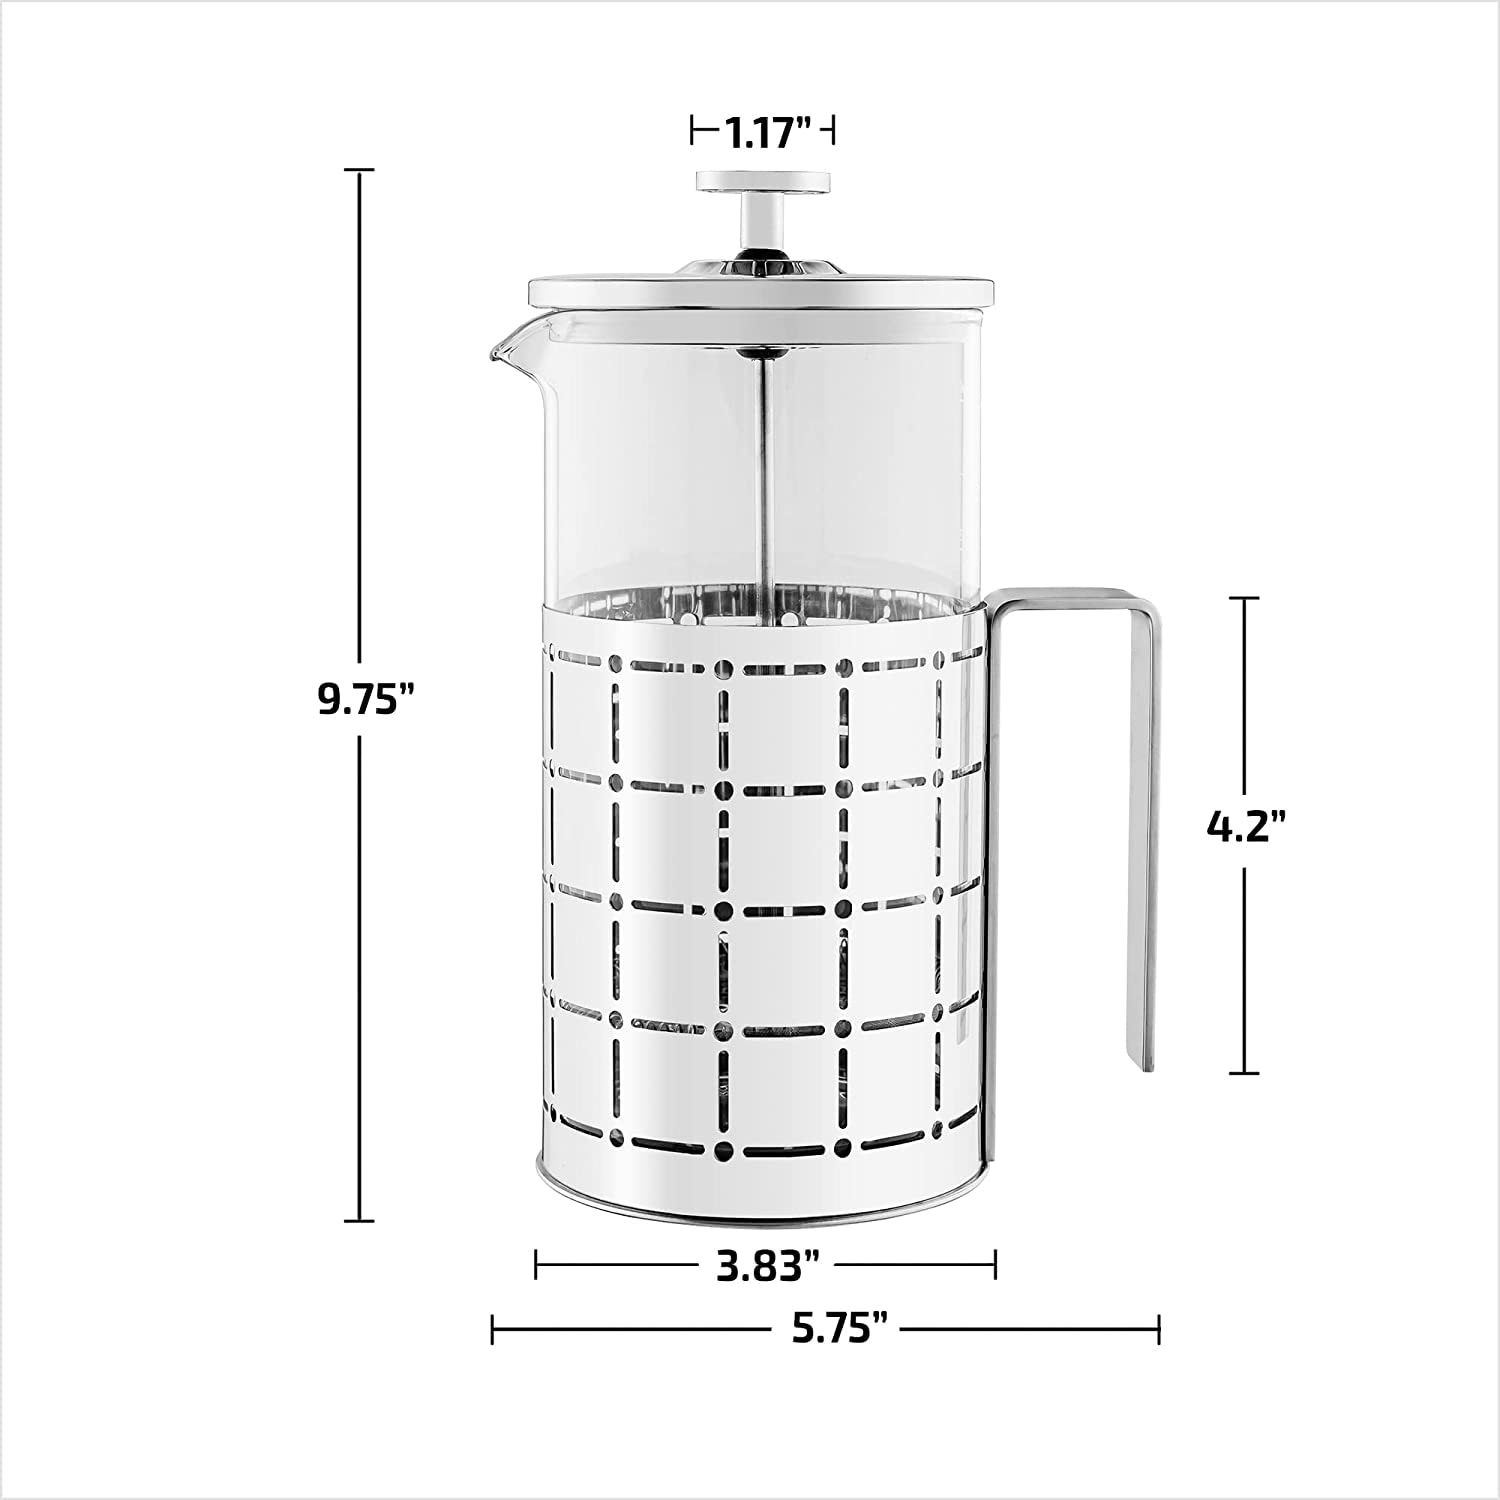 https://ak1.ostkcdn.com/images/products/is/images/direct/636712175bacdf0a0d1f51e451002de300d6e366/Ovente-French-Press-34-Ounce-1-Liter-Coffee-%26-Tea-Maker%2C-4-Level-Stainless-Steel-Filter-System%2C-Silver-FSS34P.jpg